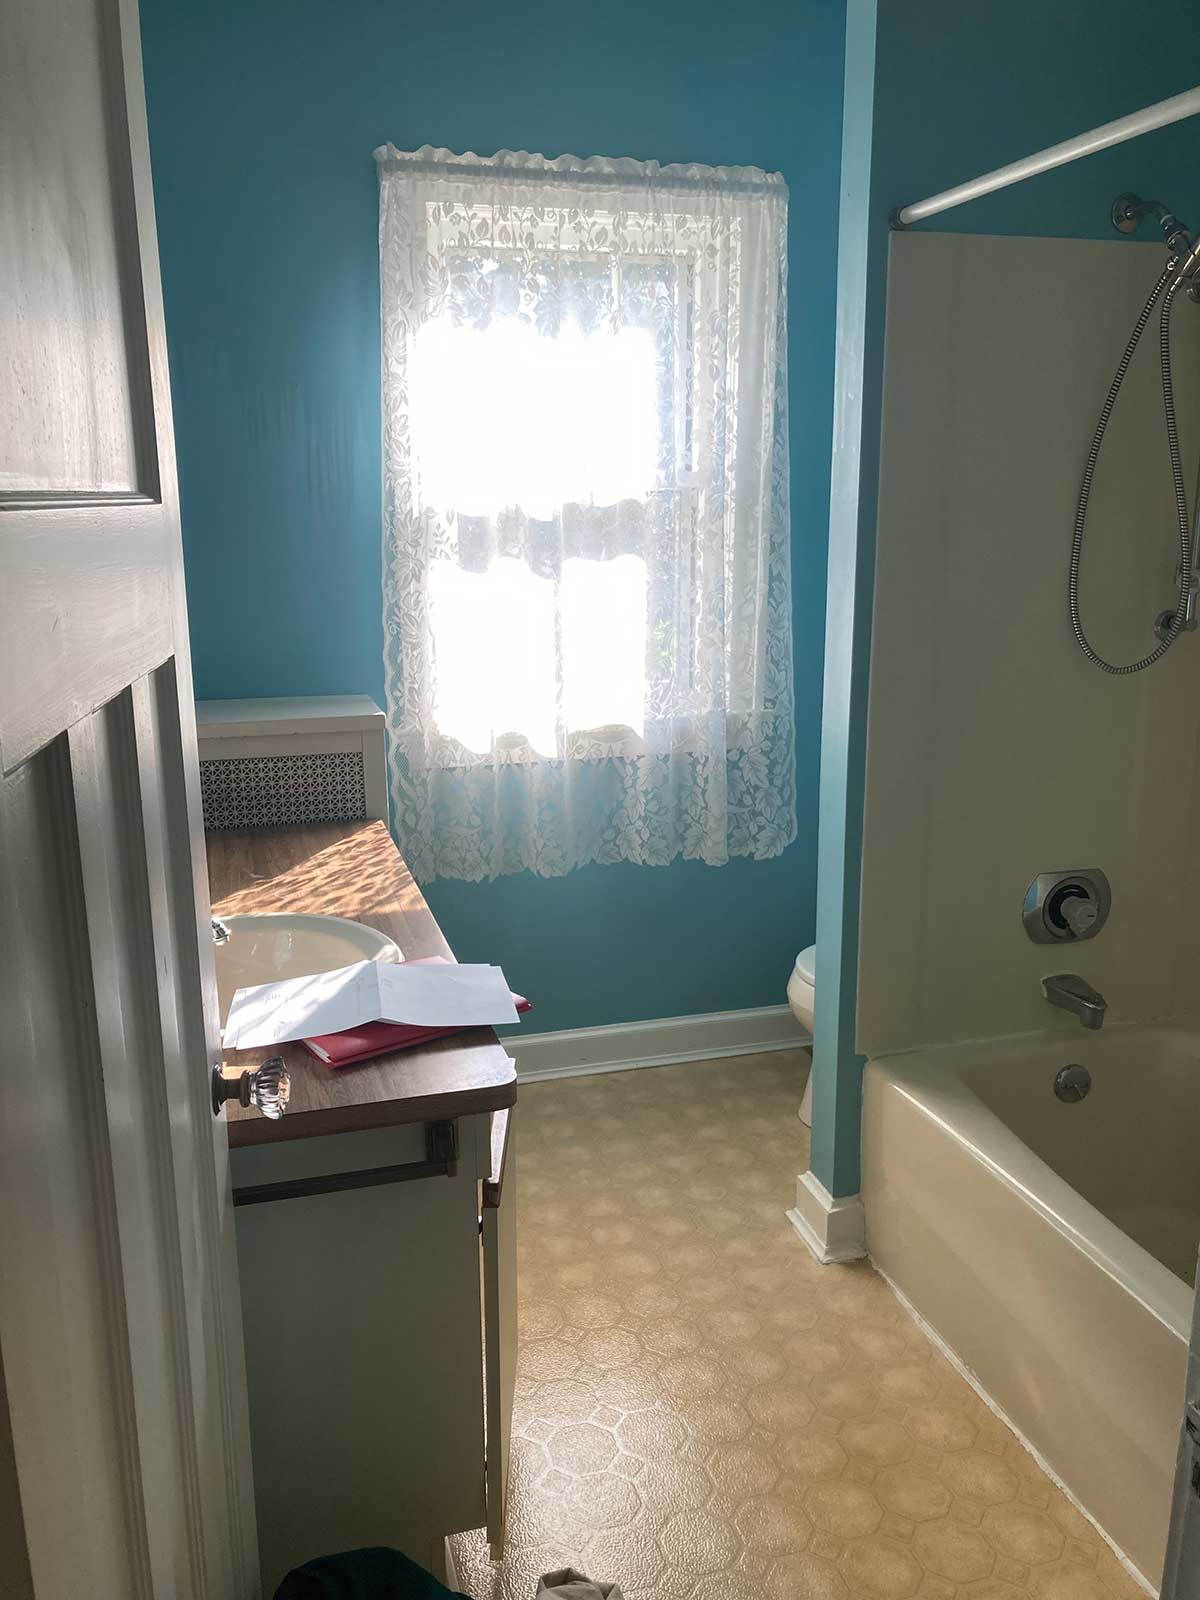 Primary and Main Bathroom Remodel in Madison, WI